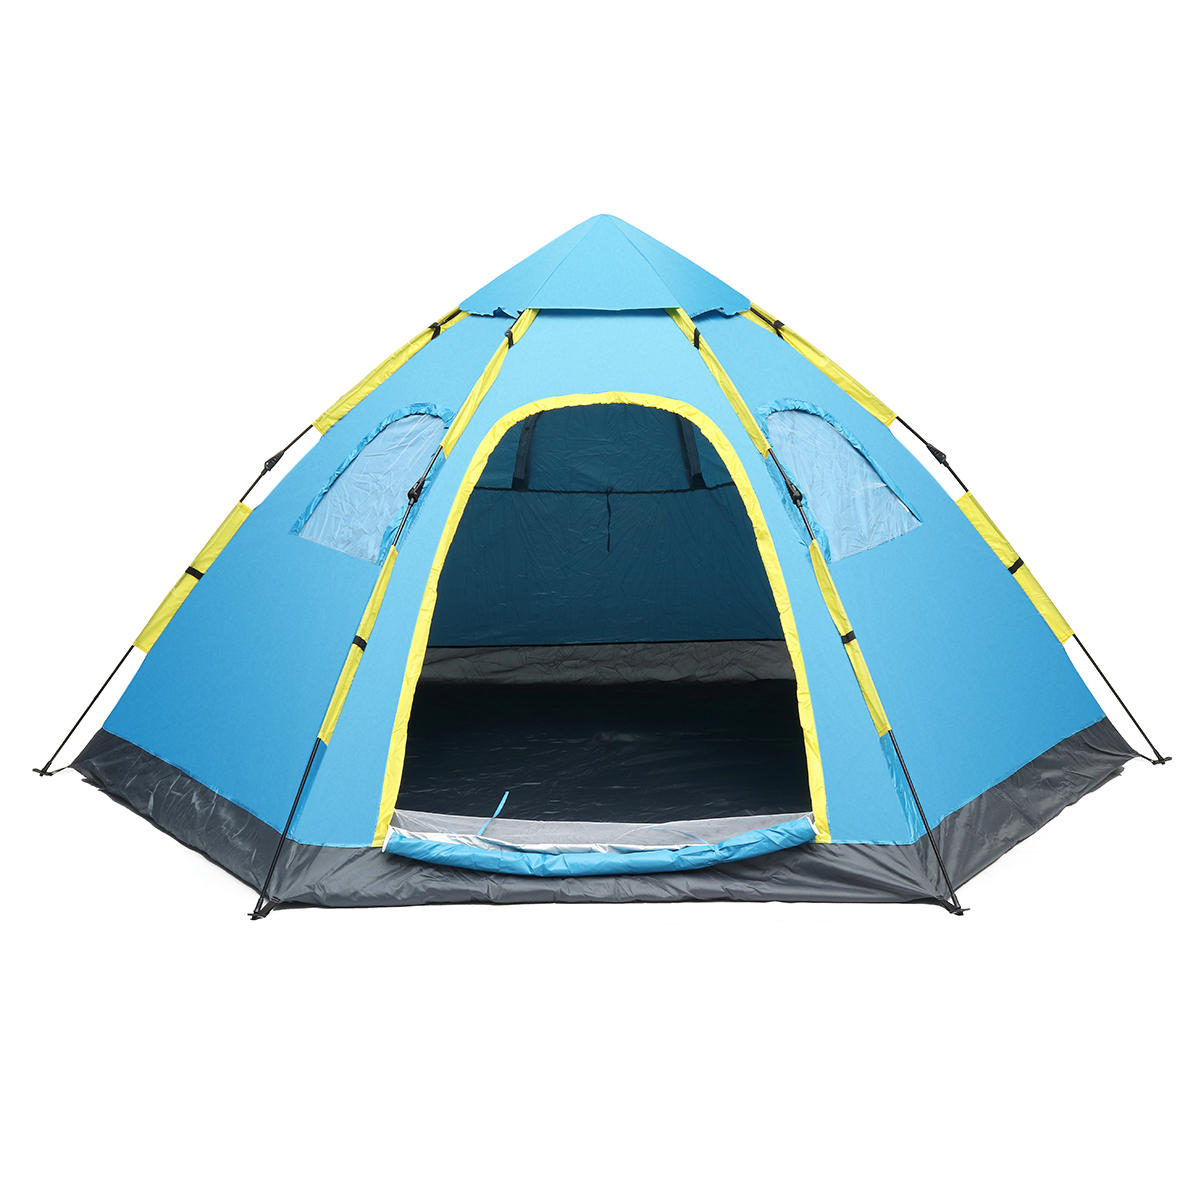 Outdoor Camping 5-8 People Automatic Pop Up Tent Waterproof UV Beach Family Sunshade Canopy